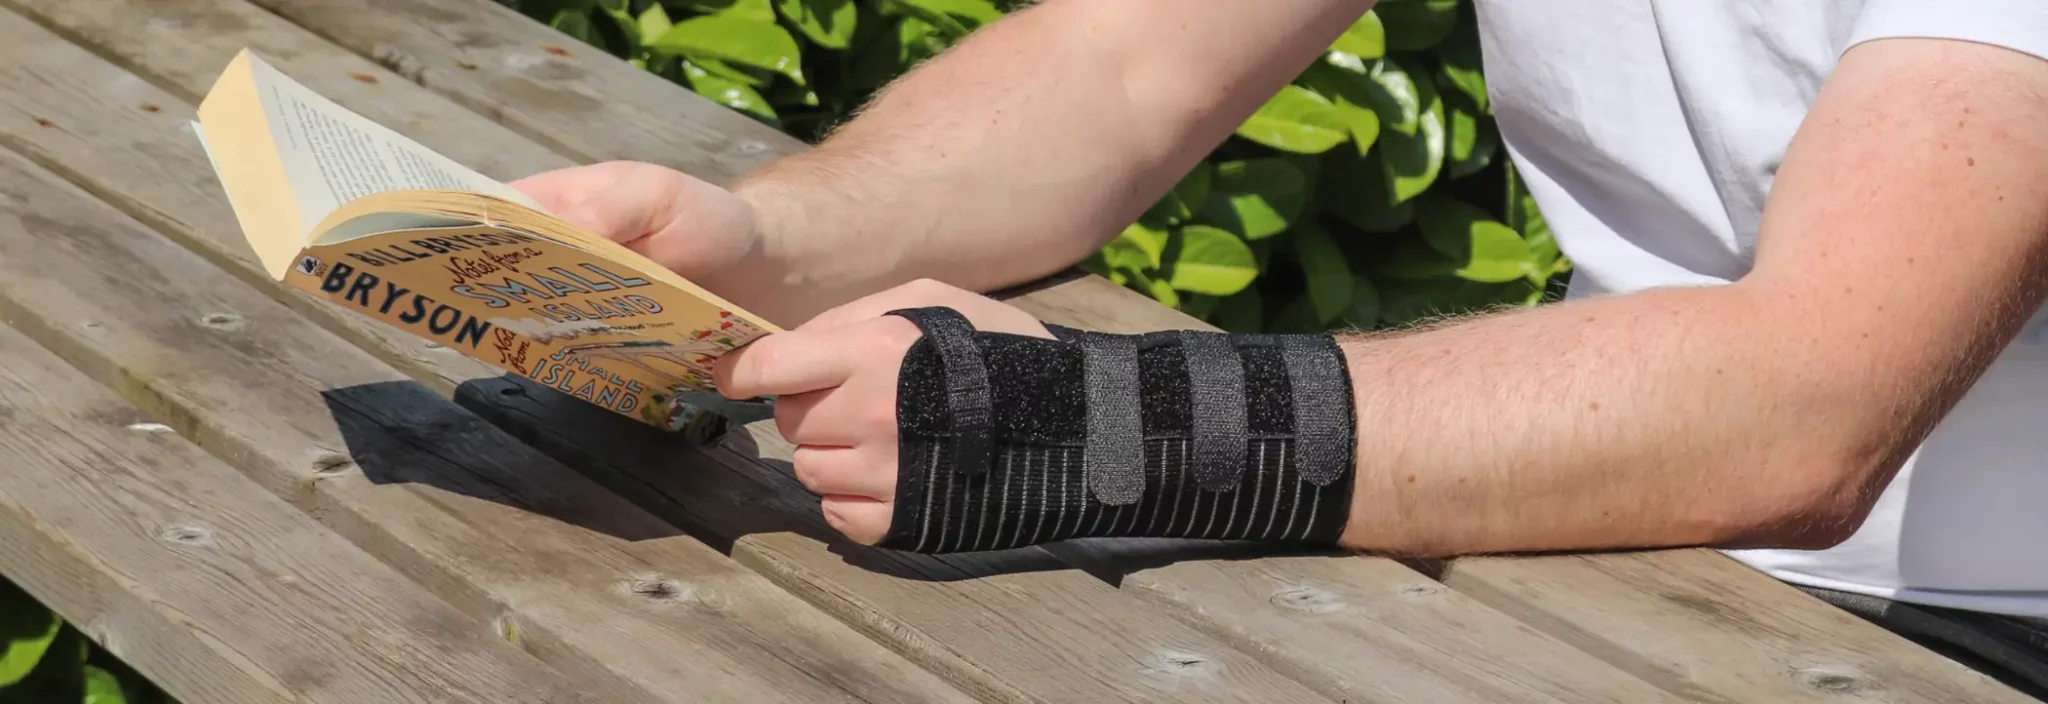 Image of a wrist and hand brace being used